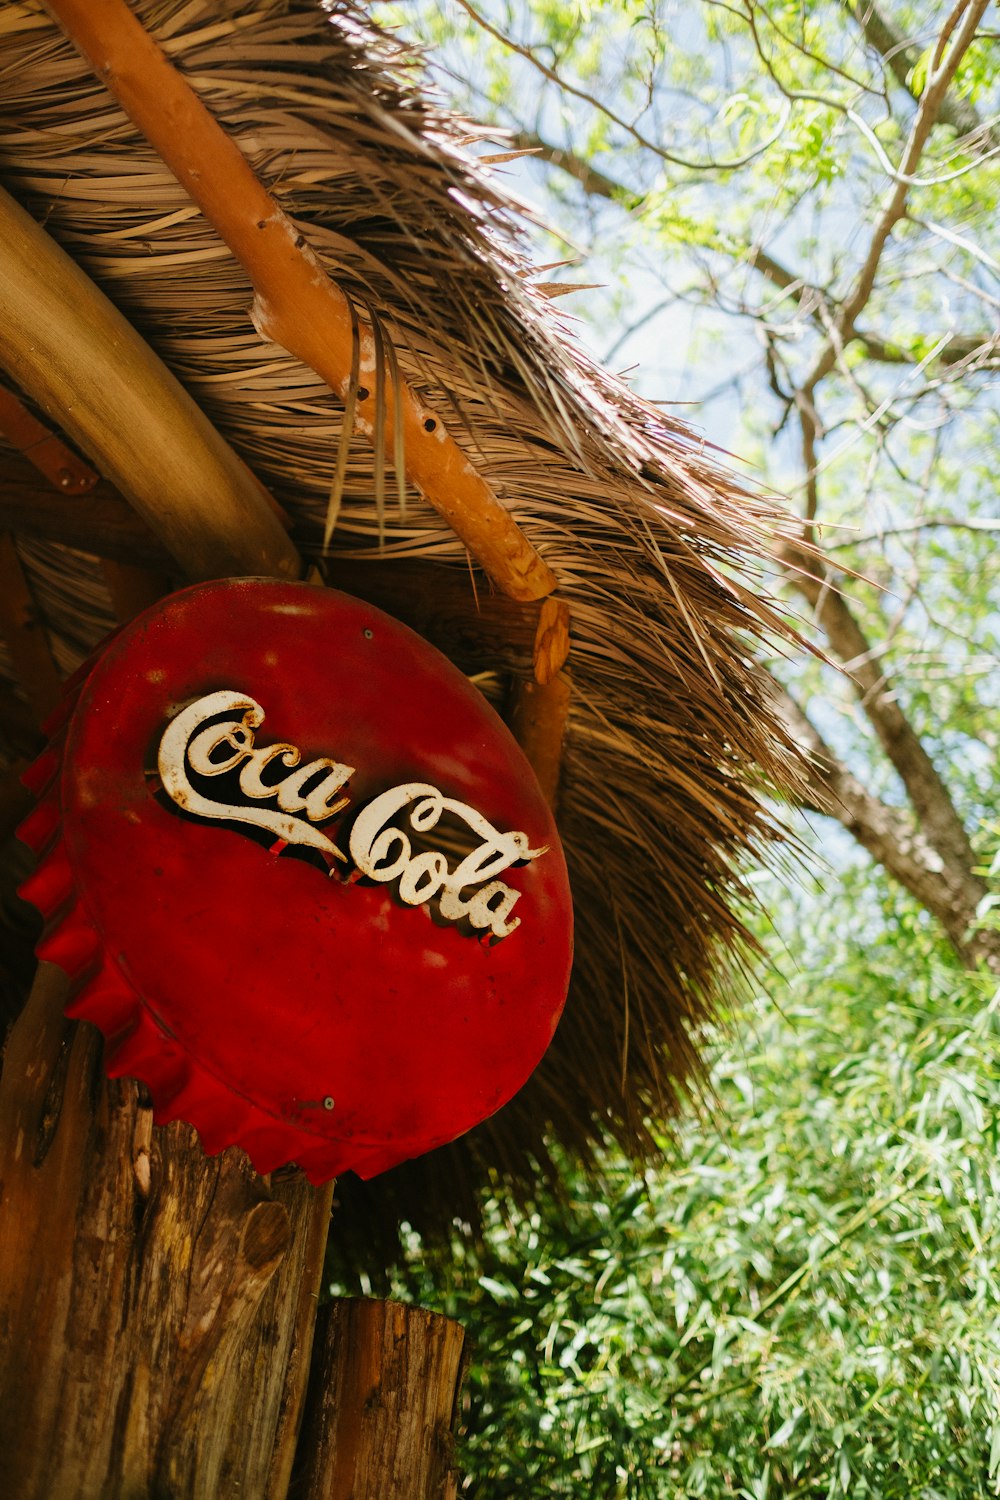 a coca cola sign hanging from a thatched roof